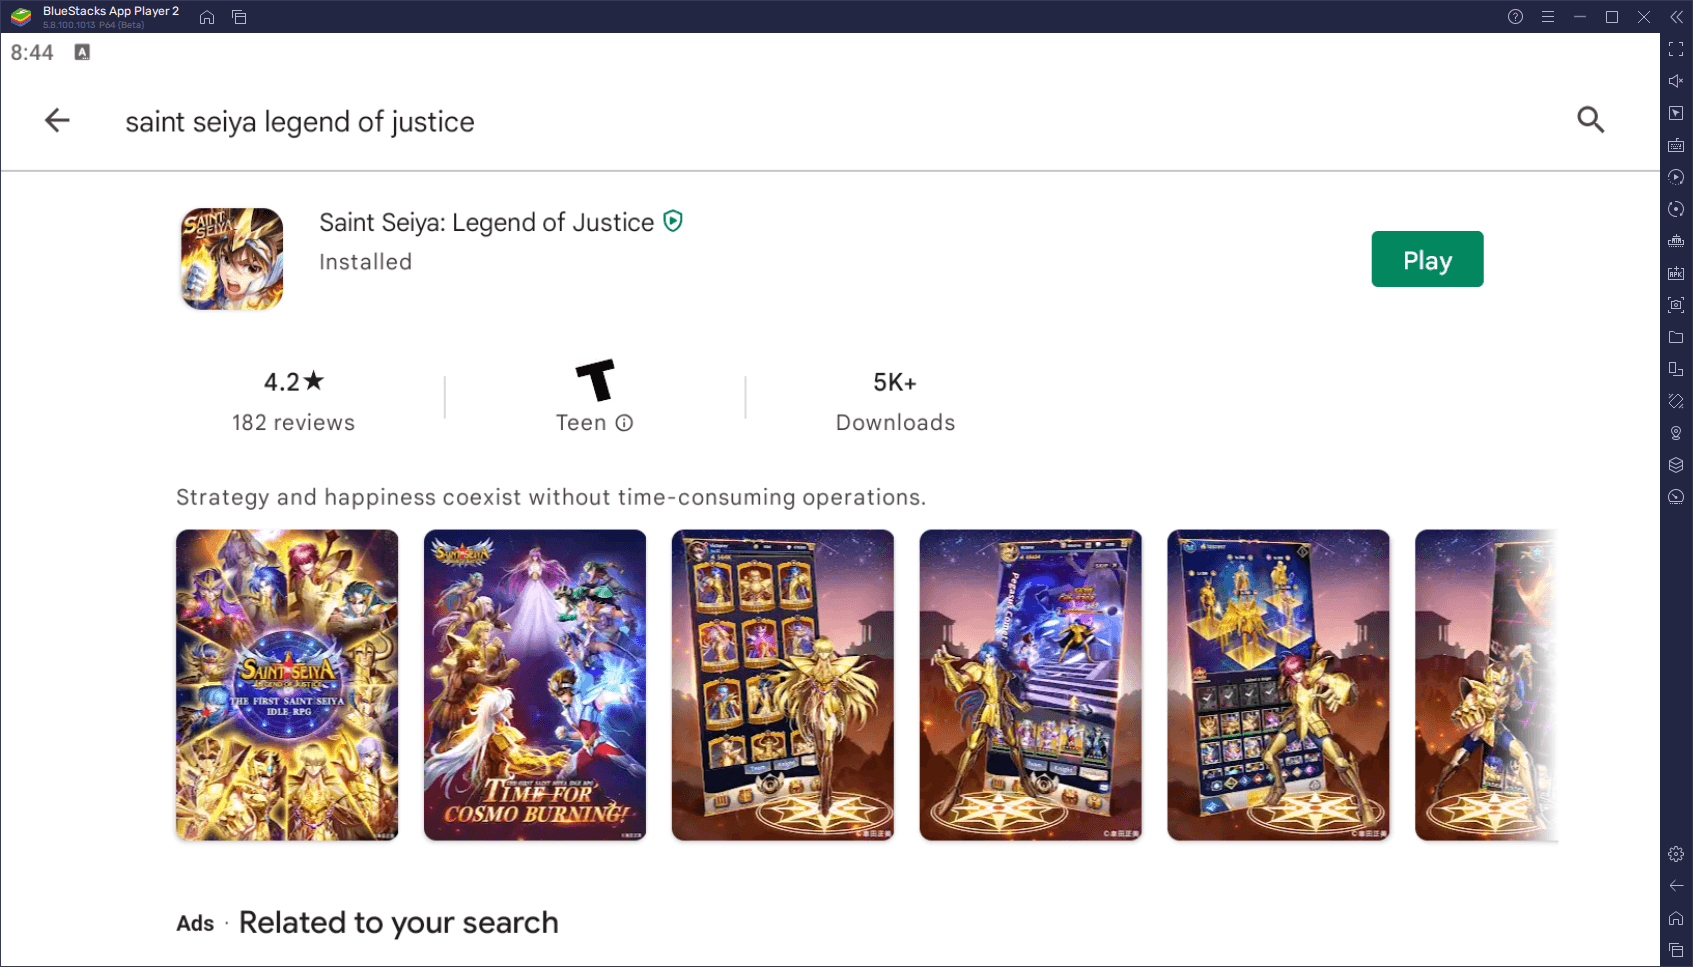 How to Play Saint Seiya: Legend of Justice on PC with BlueStacks